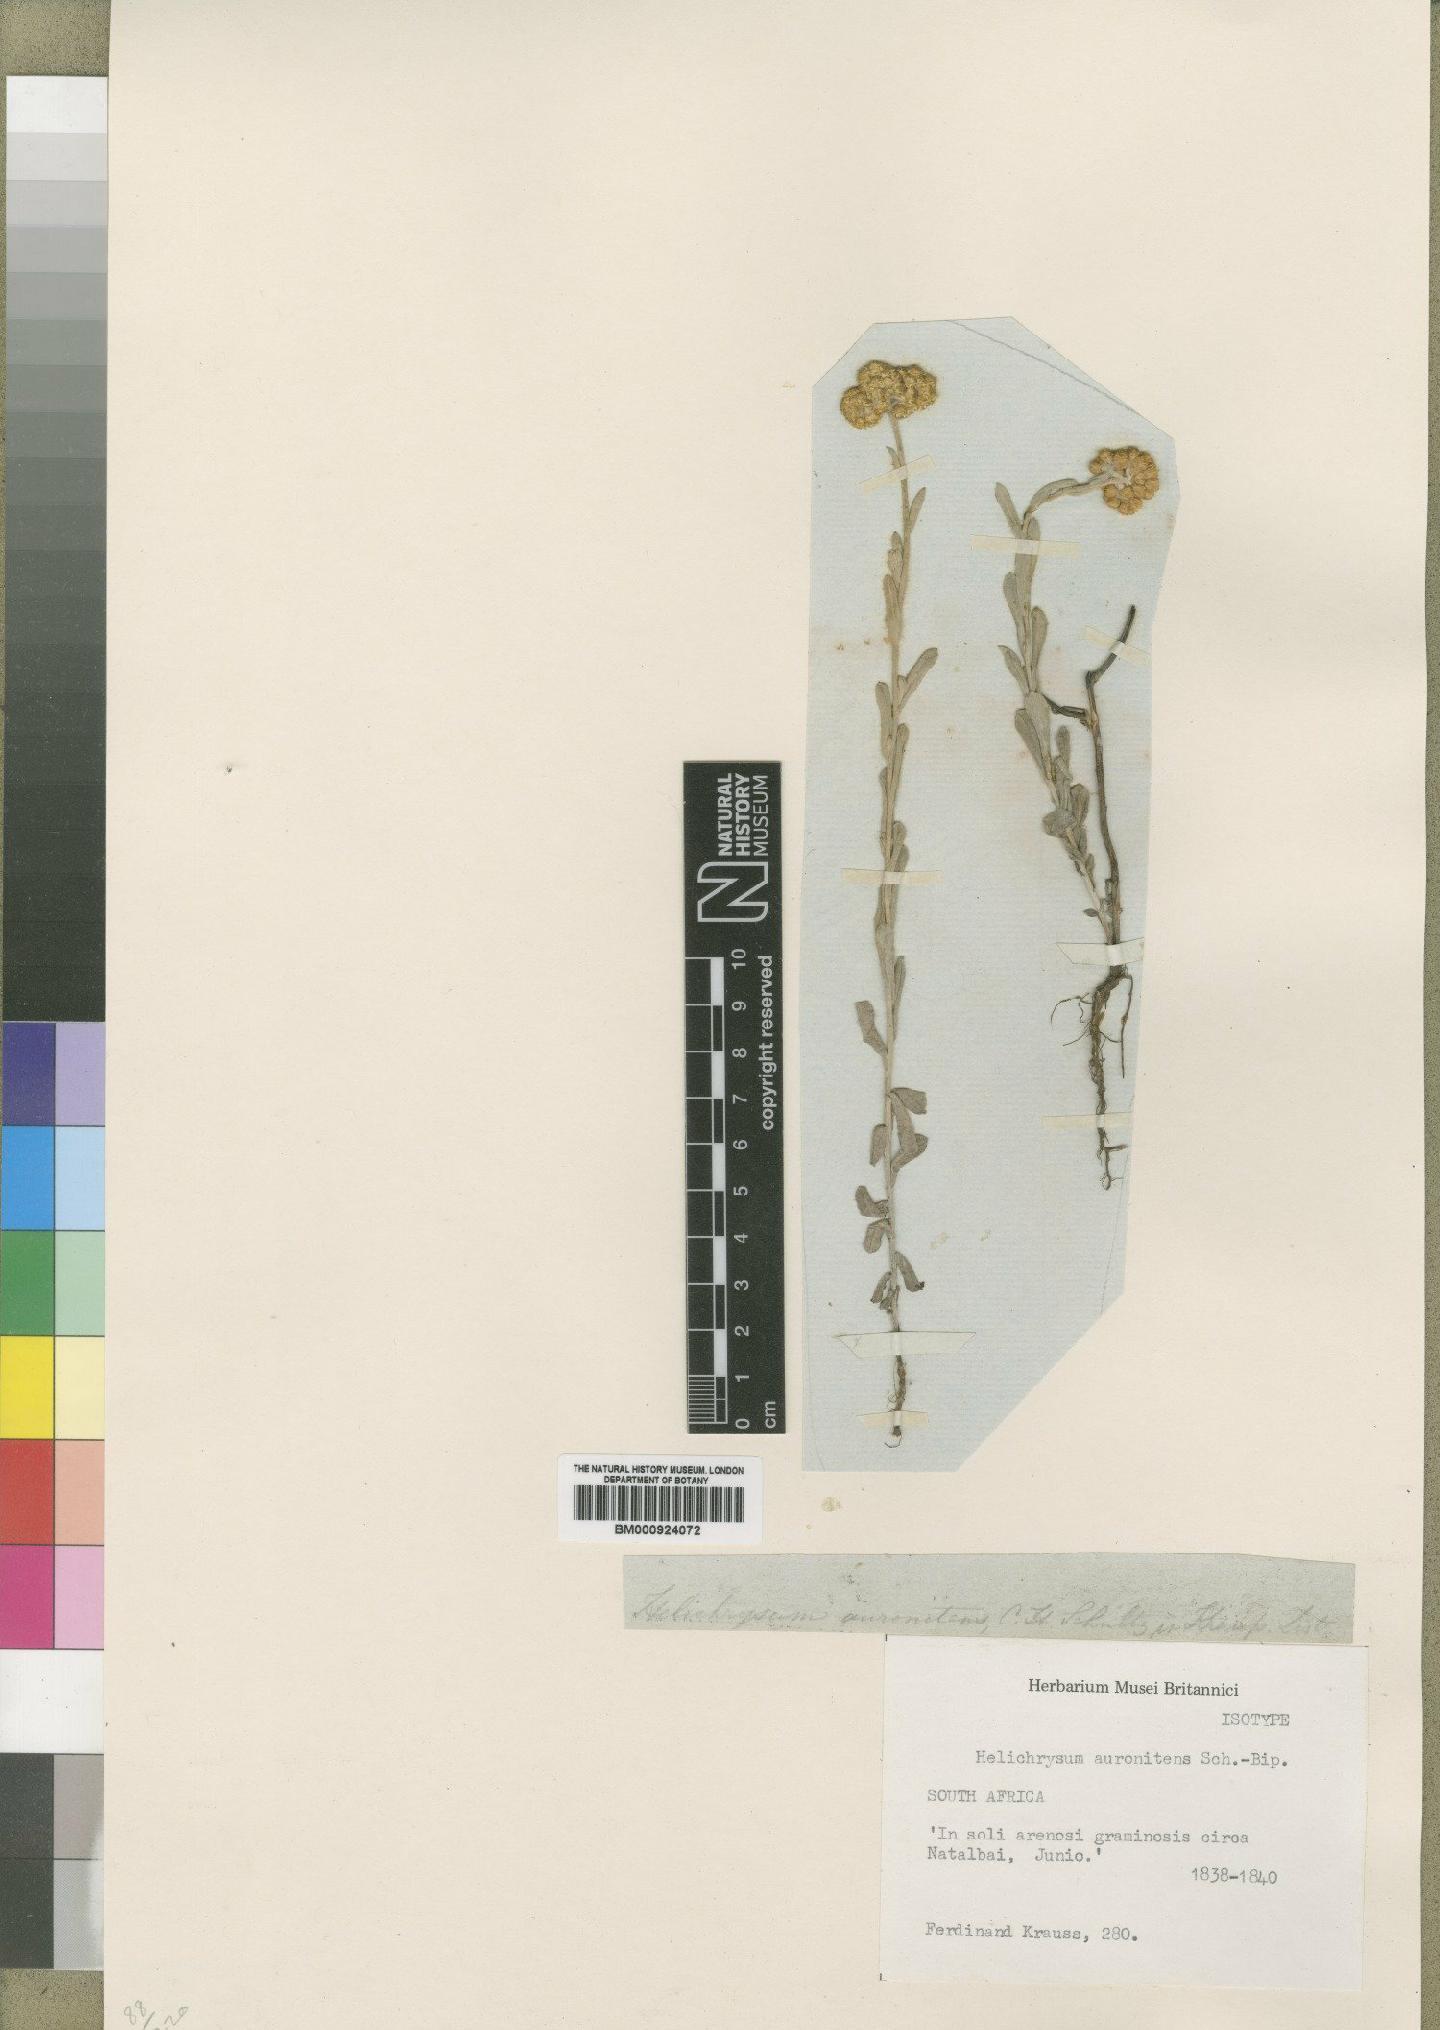 To NHMUK collection (Helichrysum auronitens Sch.Bip.; Isotype; NHMUK:ecatalogue:4529100)